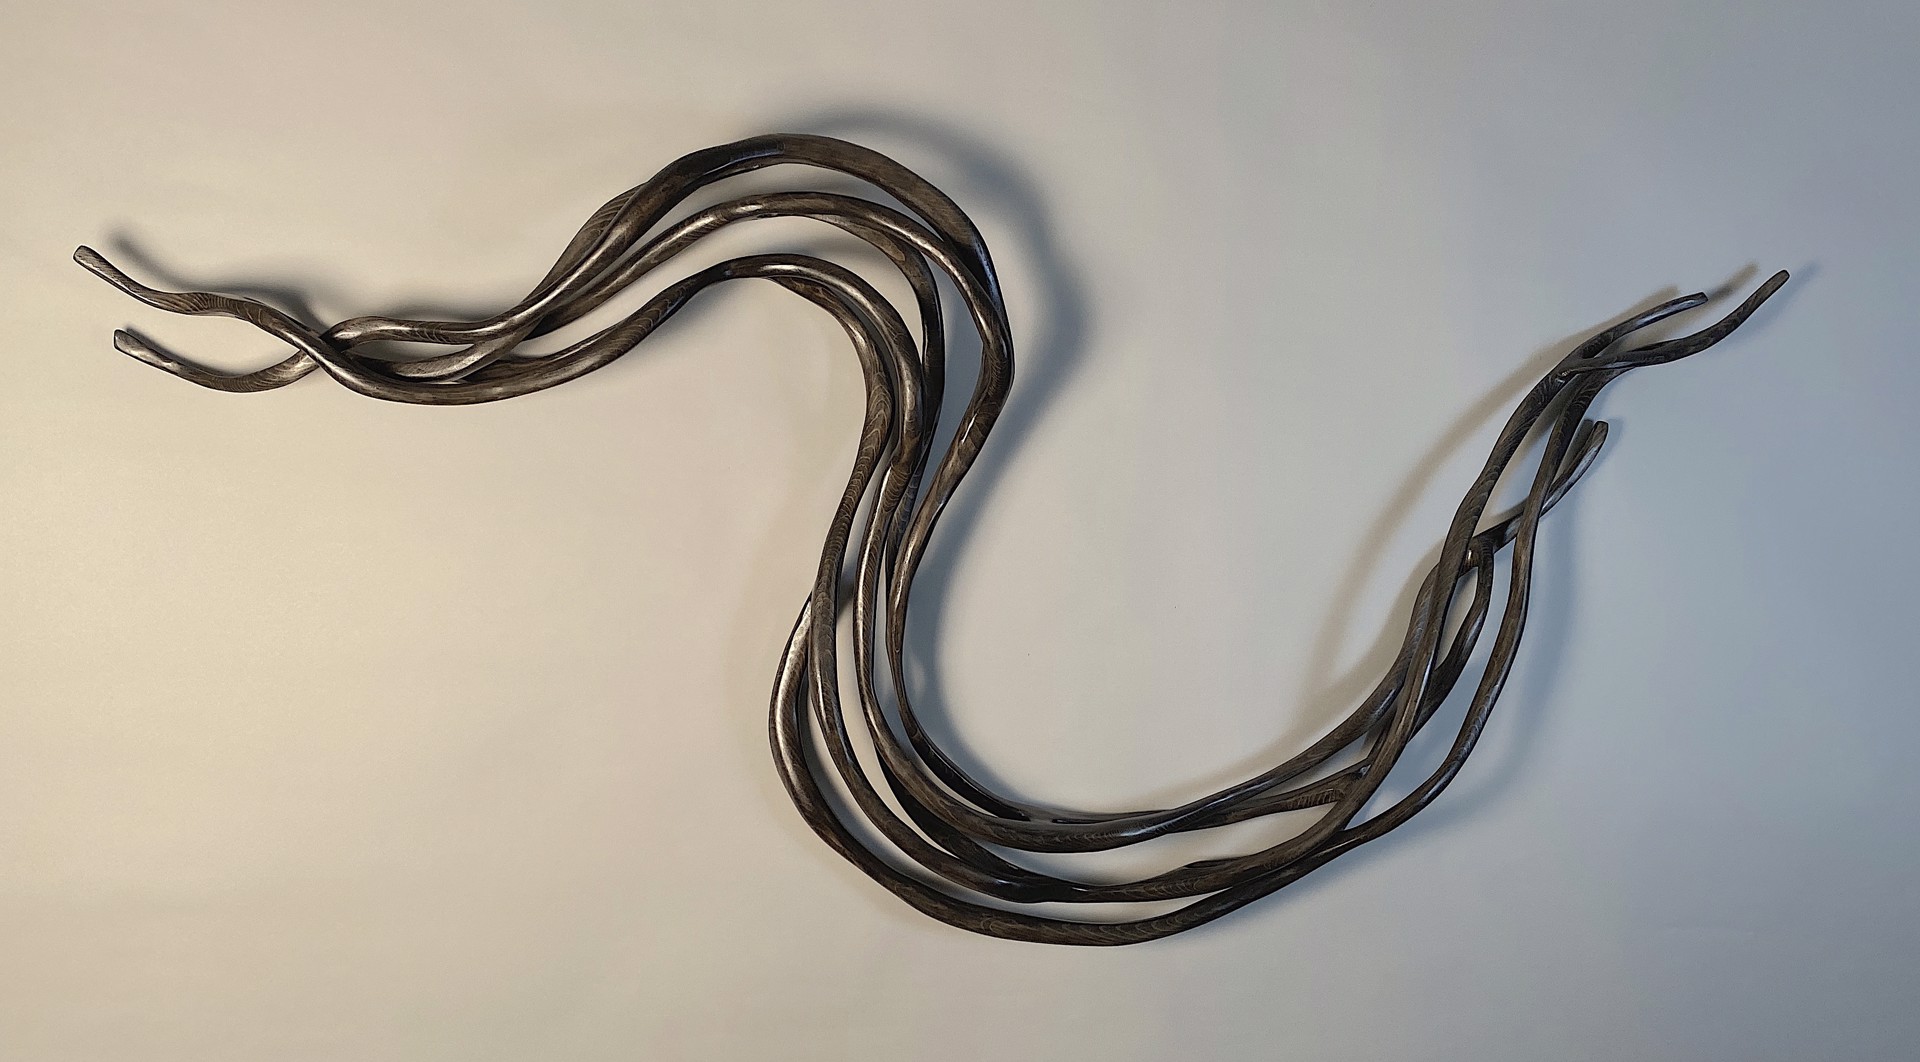 Charcoal Rope II by Caprice Pierucci